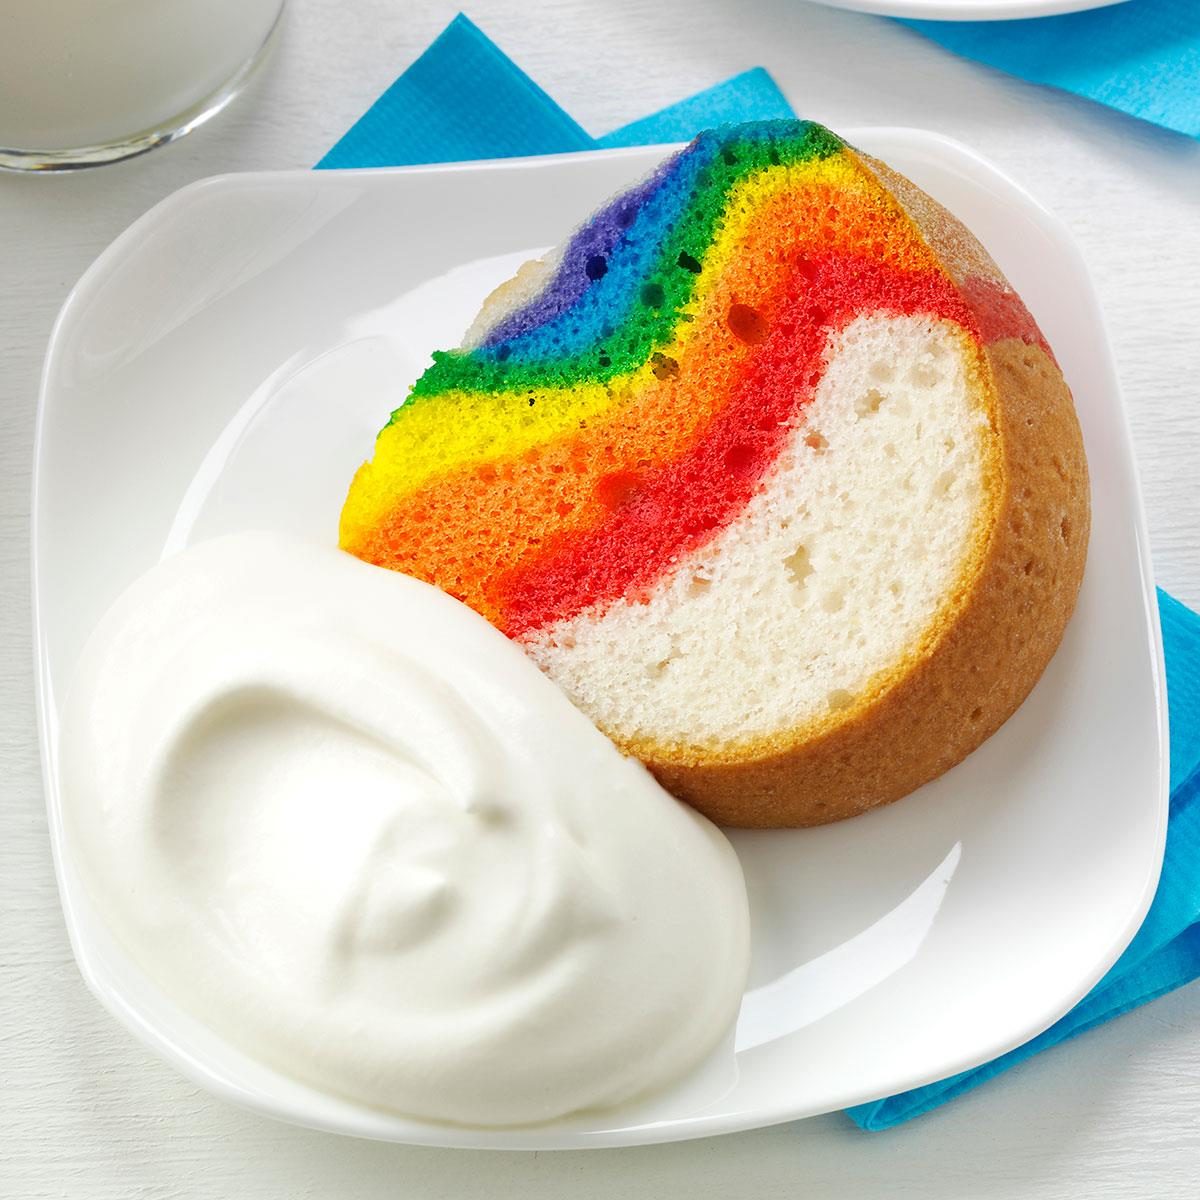 <p>Some cakes stand on their own without icing. For this bright Rainbow Cake, use a little whipped cream to make fluffy clouds. —Janet Tigchelaar, Jerseyville, Ontario</p> <div class="listicle-page__buttons"> <div class="listicle-page__cta-button"><a href='https://www.tasteofhome.com/recipes/rainbow-cake-with-clouds/'>Go to Recipe</a></div> </div>